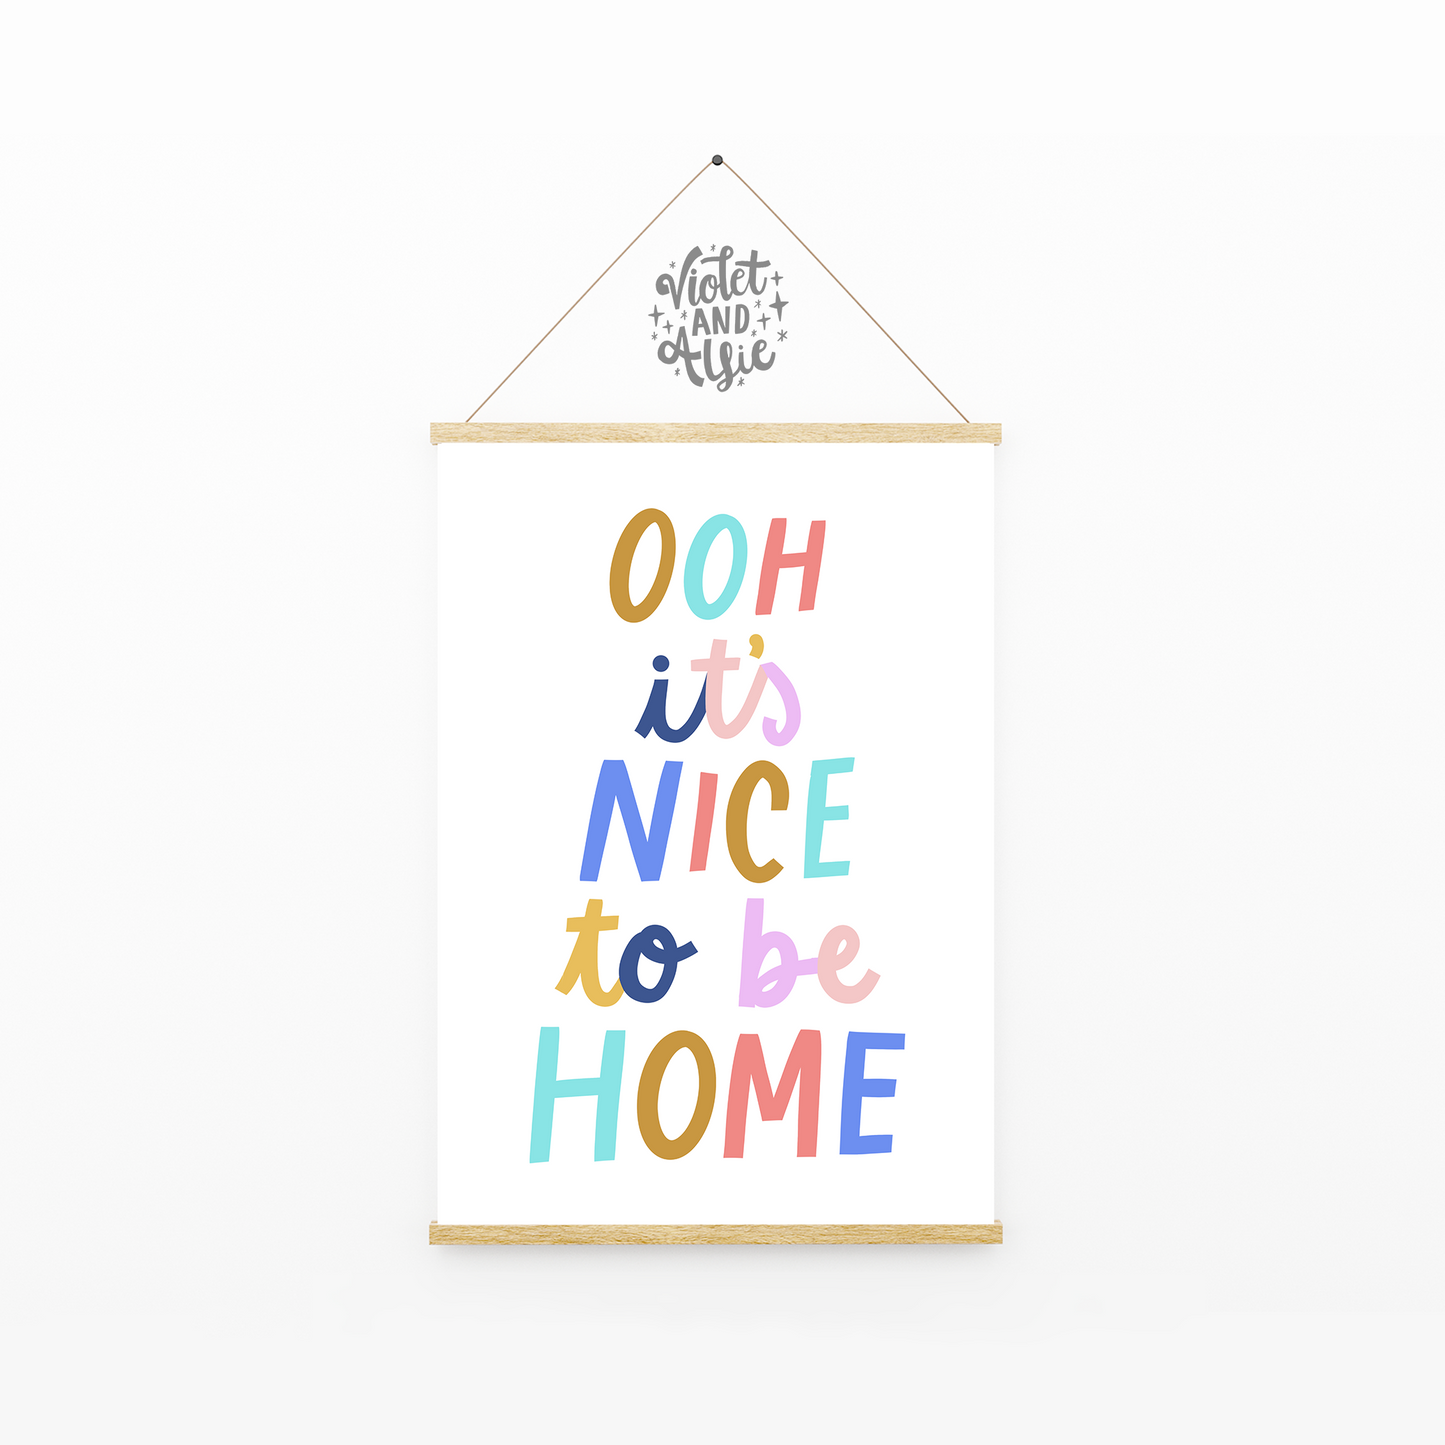 'Ooh it's nice to be home' This bright and relatable print is a little celebration to greet you as you walk through your front door!  Nice To Be Home Print, Housewarming Gift, Entrance Hall Wall Art, Staircase Gallery Wall Art, Hallway Poster, Home sweet home print, colourful home decor, prints for your home, prints for hallway, prints for gallery wall 